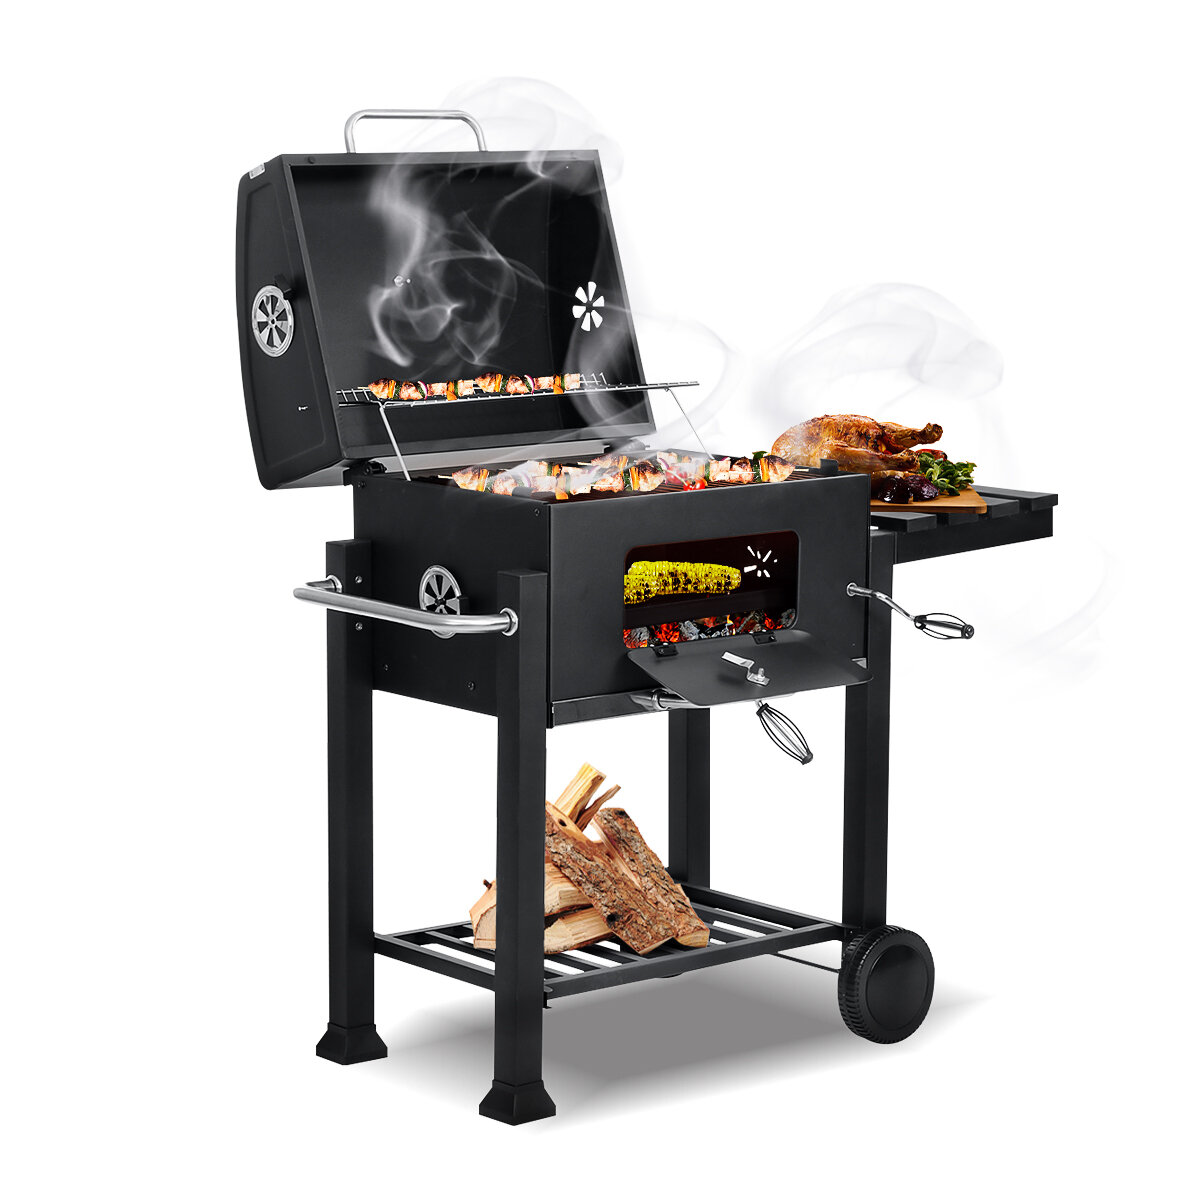 Image of Portable BBQ Barbecue Grill Trolley Garden Patio Outdoor Charcoal Smoker